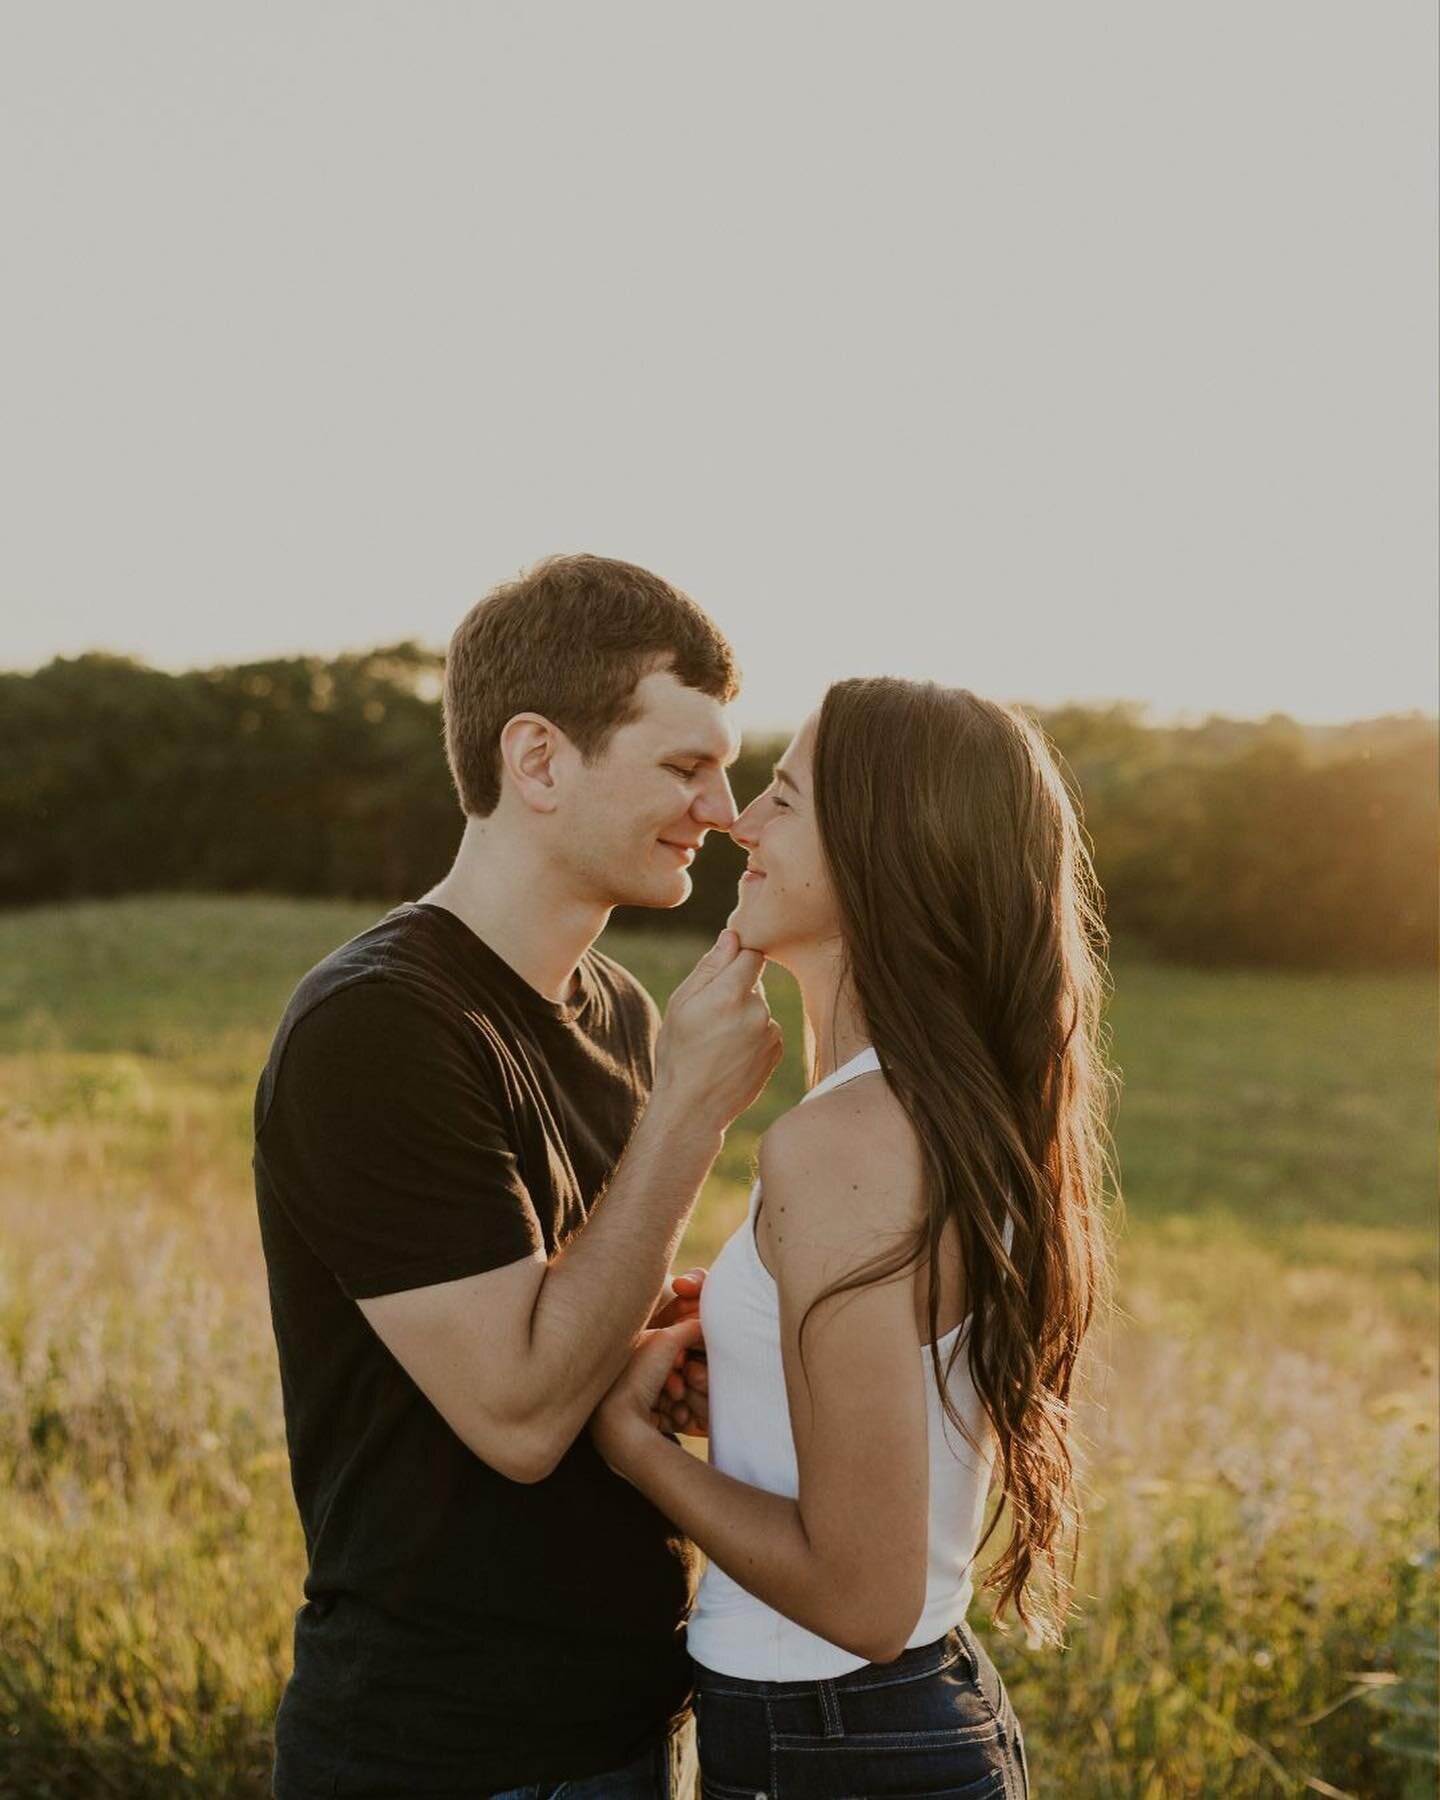 It&rsquo;s safe to say that I&rsquo;m obsessed with this golden, summer engagement session featuring Brittany + Austin! ☀️

When I tell you I am seriously considering moving near this park to photograph them there every weekend, you would think I&rsq